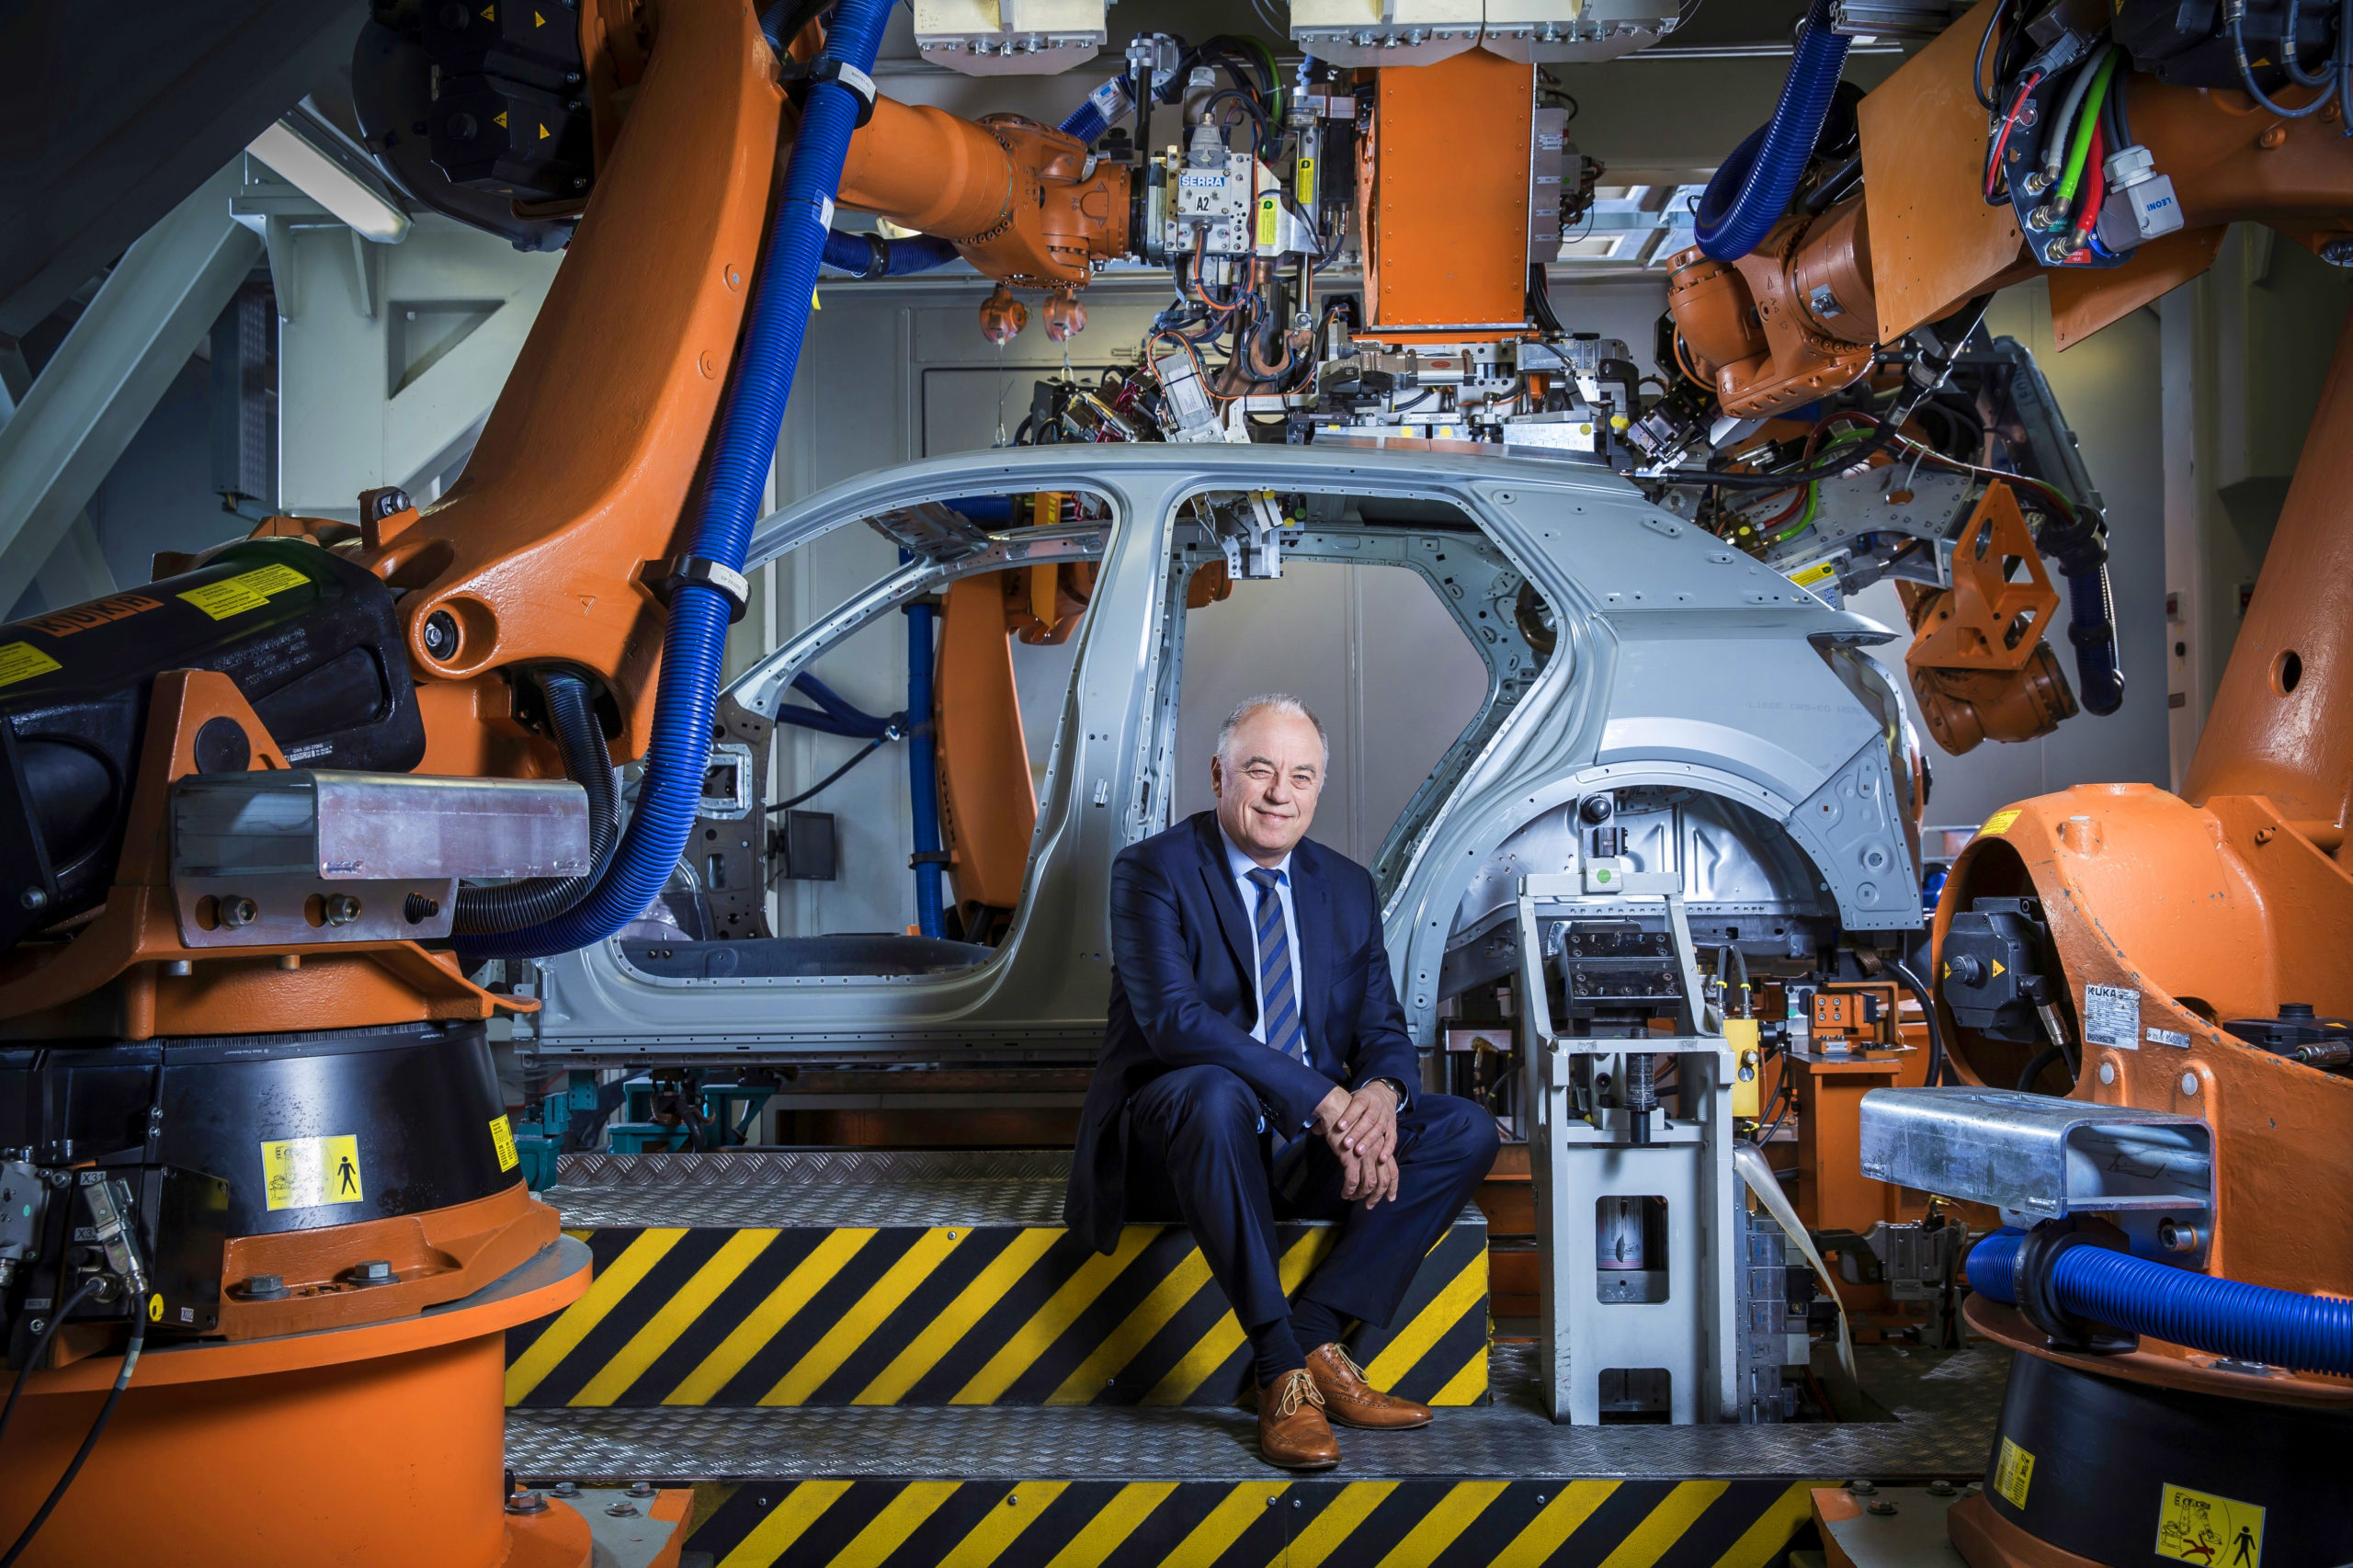 “We pulverized our complete organization”: With the reorganization of production – project “P” – Production Board Member Peter Kössler and his team, together with Porsche Consulting, achieved the largest transformation in the history of Audi.